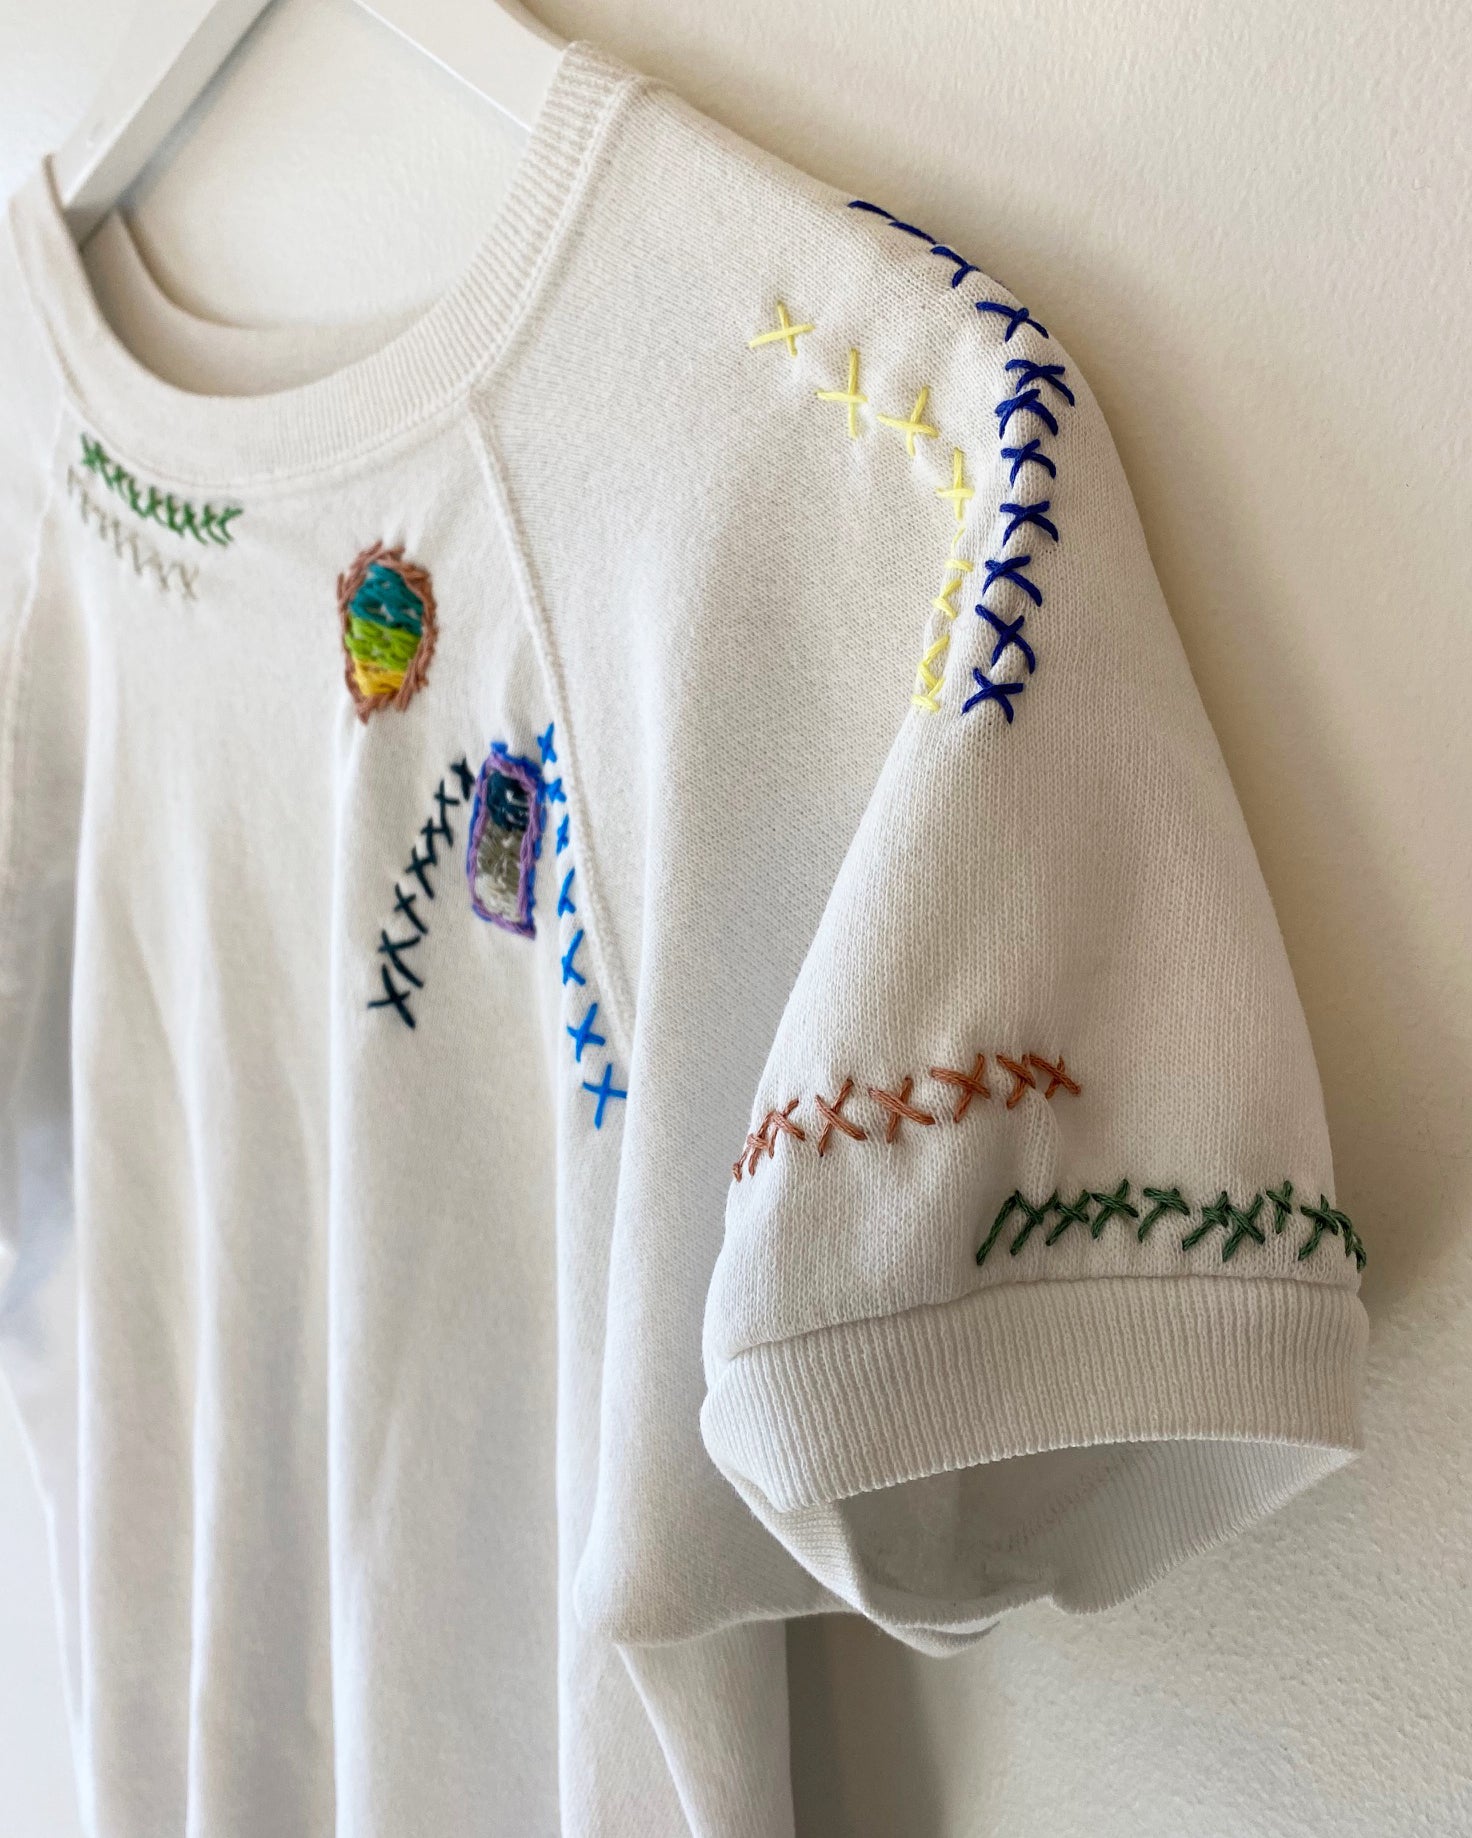 Aged white cotton sweatshirt with embroidery